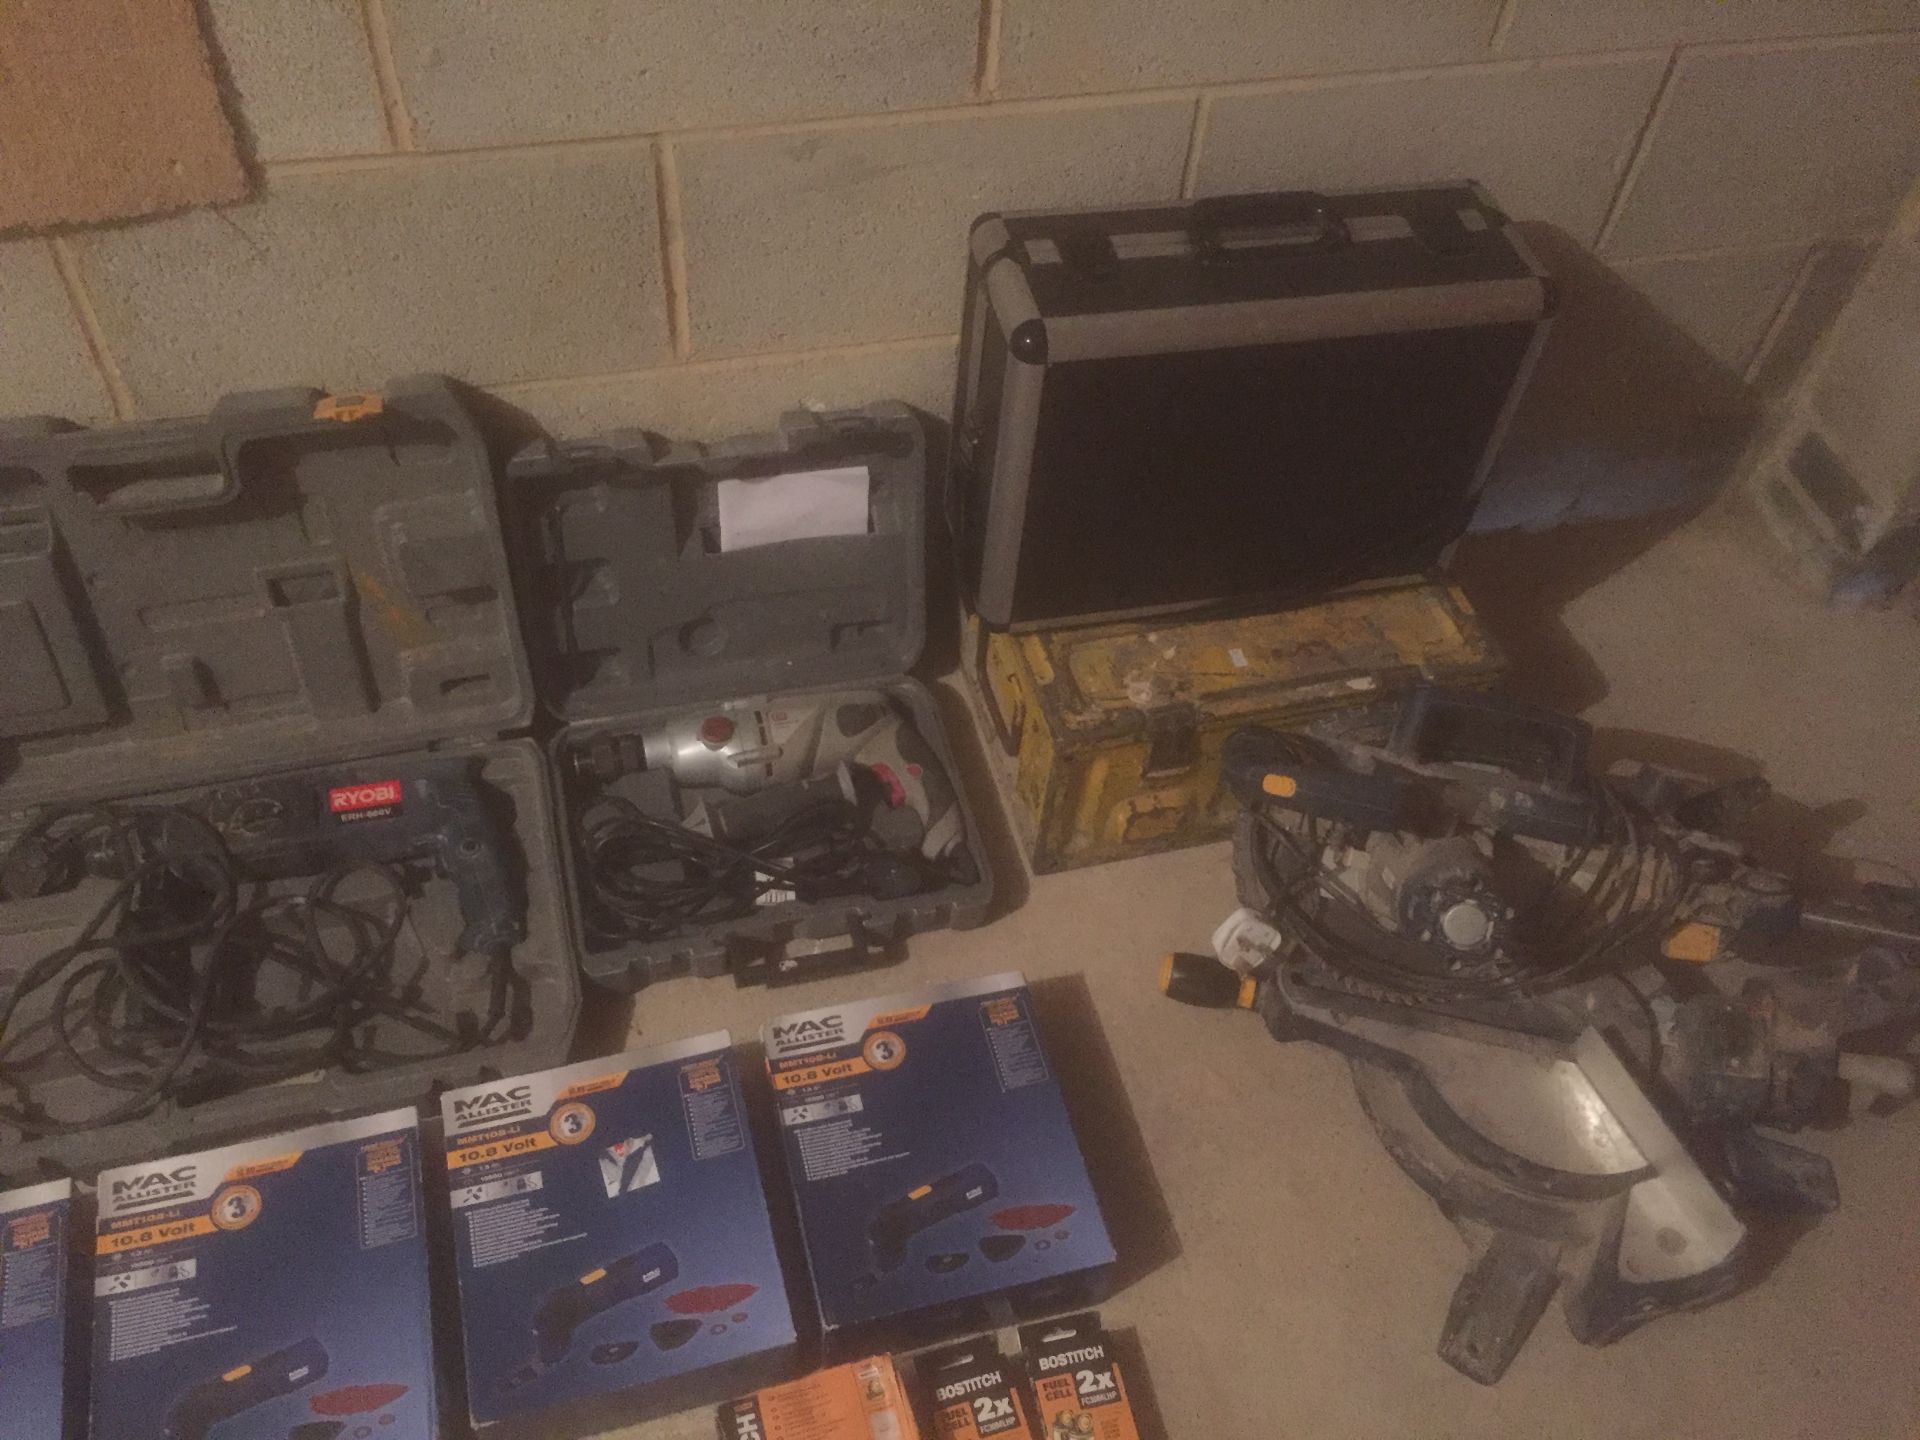 HUGE JOB LOT OF VARIOUS POWER TOOLS, HAND TOOLS, ACCESSORIES, NO RESERVE - Image 3 of 8